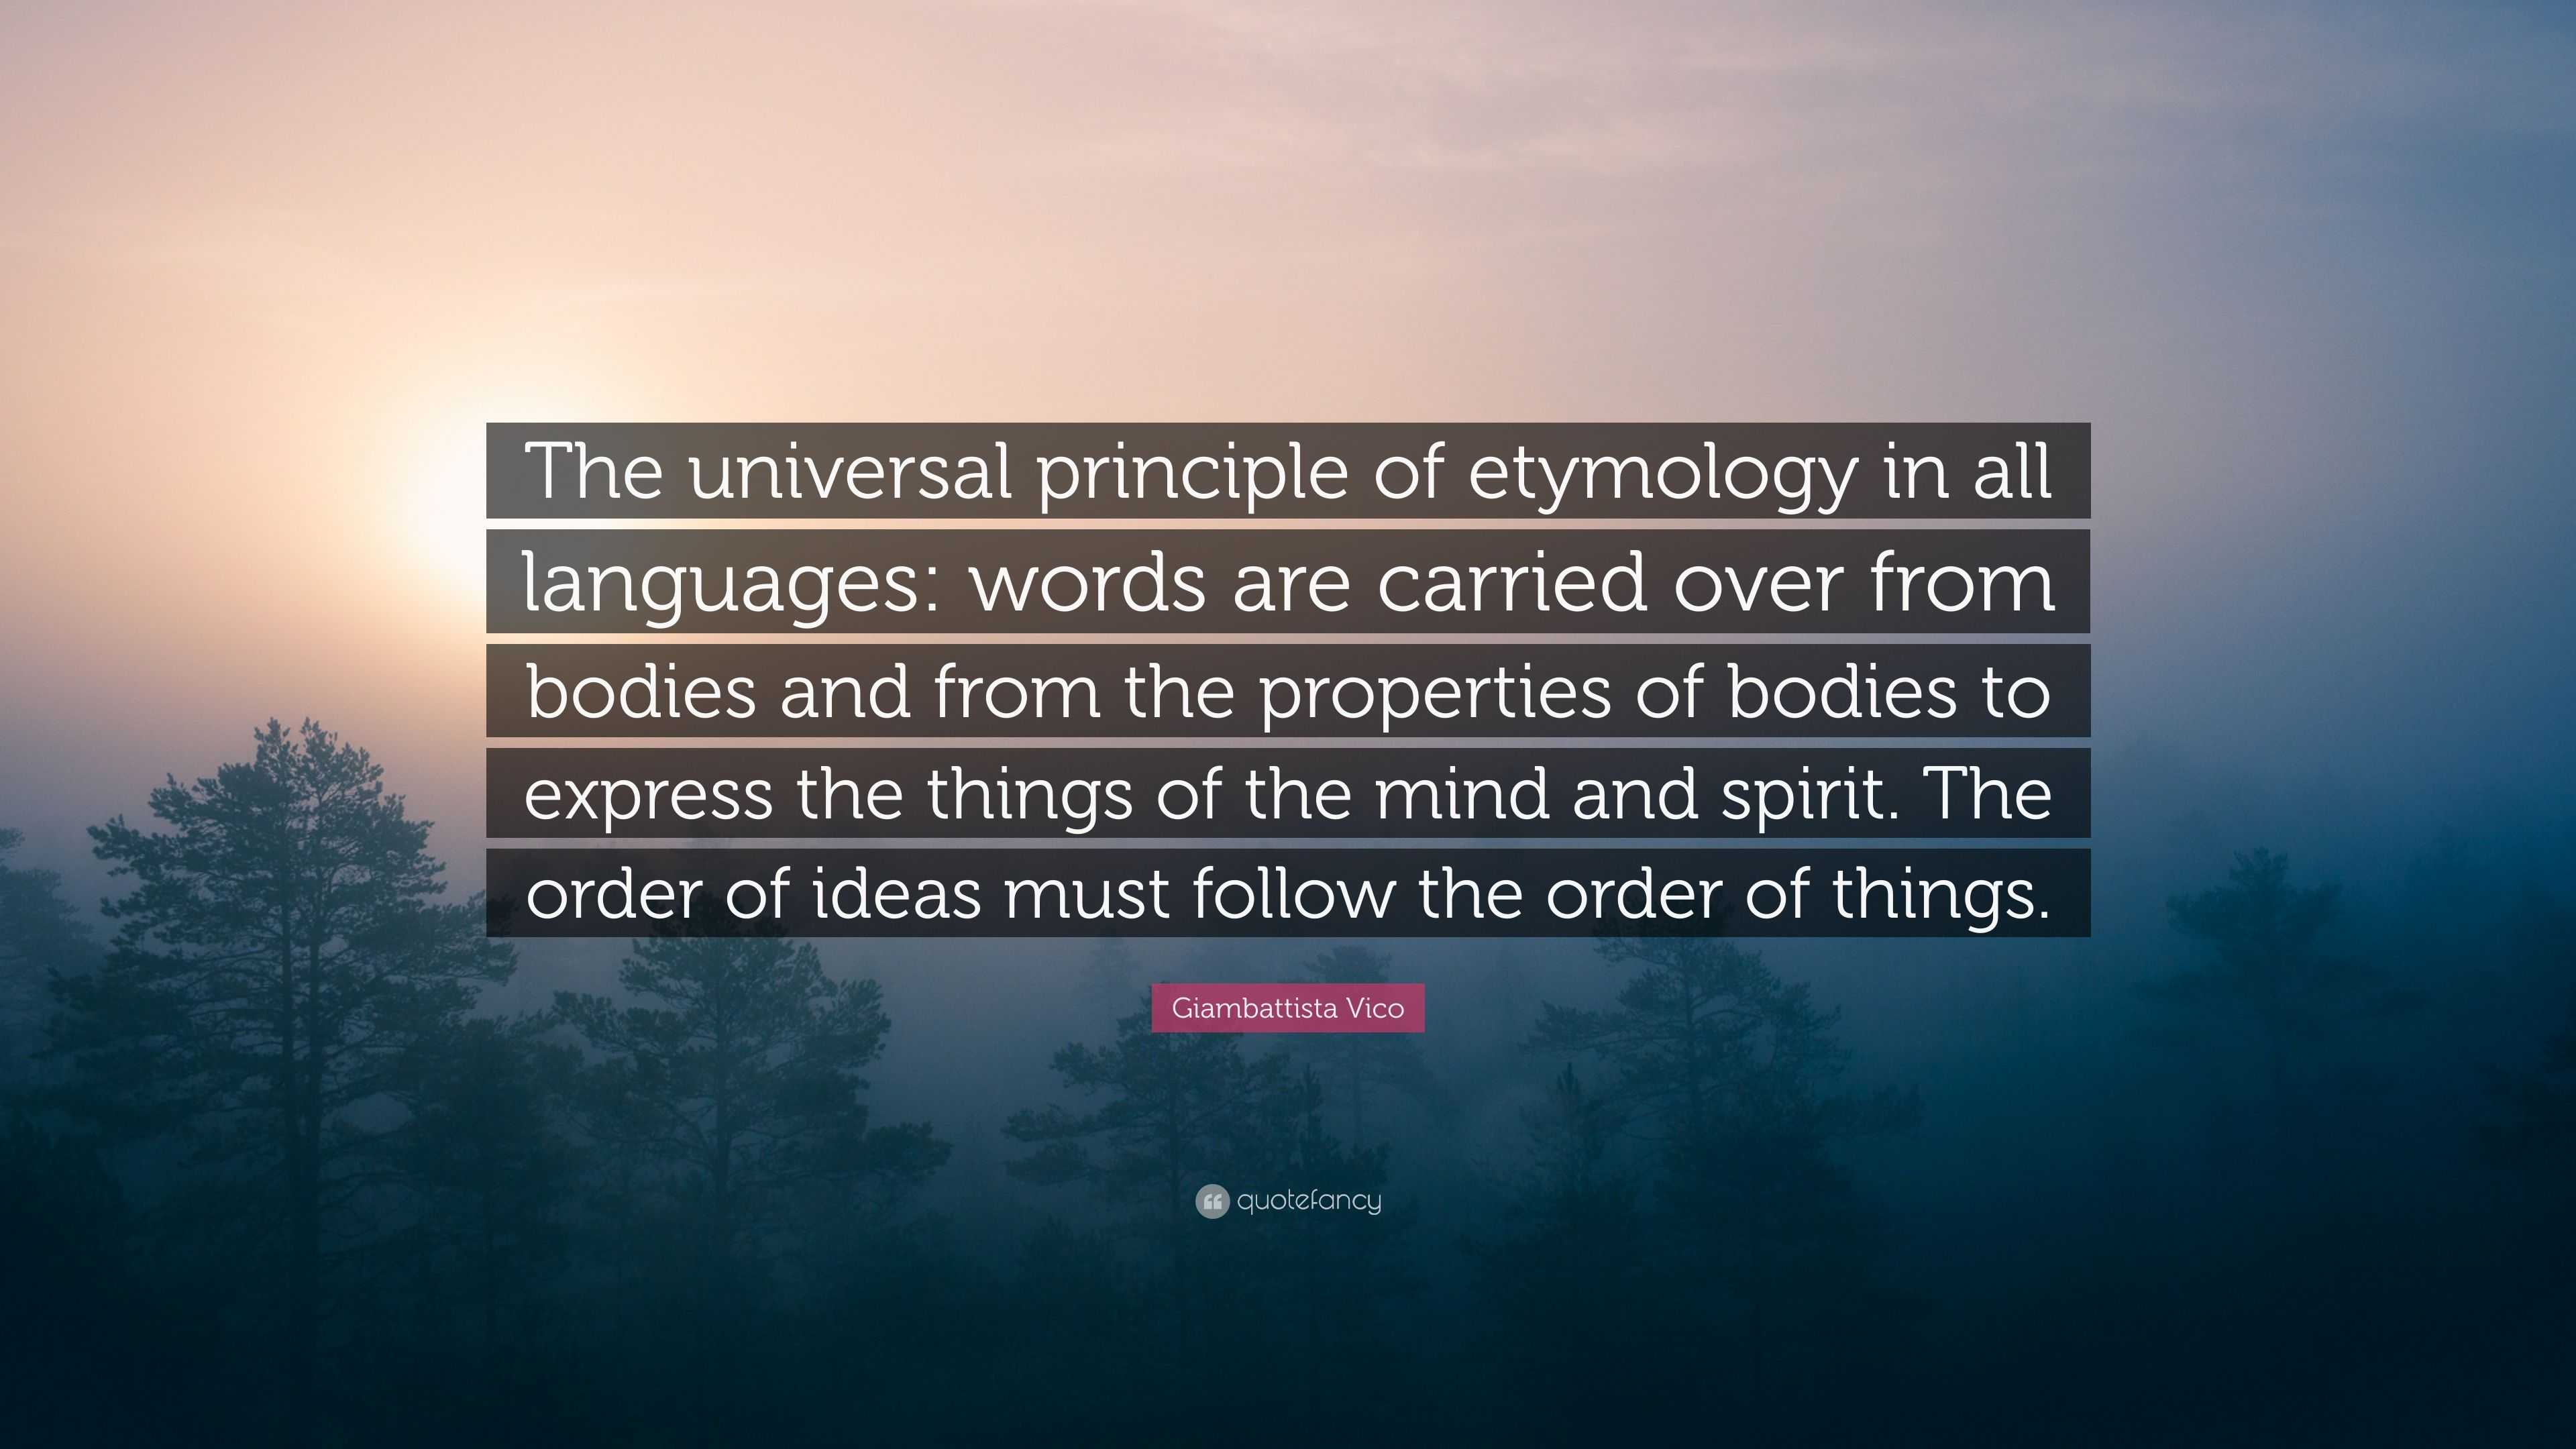 Giambattista Vico Quote: “The universal principle of etymology in all  languages: words are carried over from bodies and from the properties of  bod...”